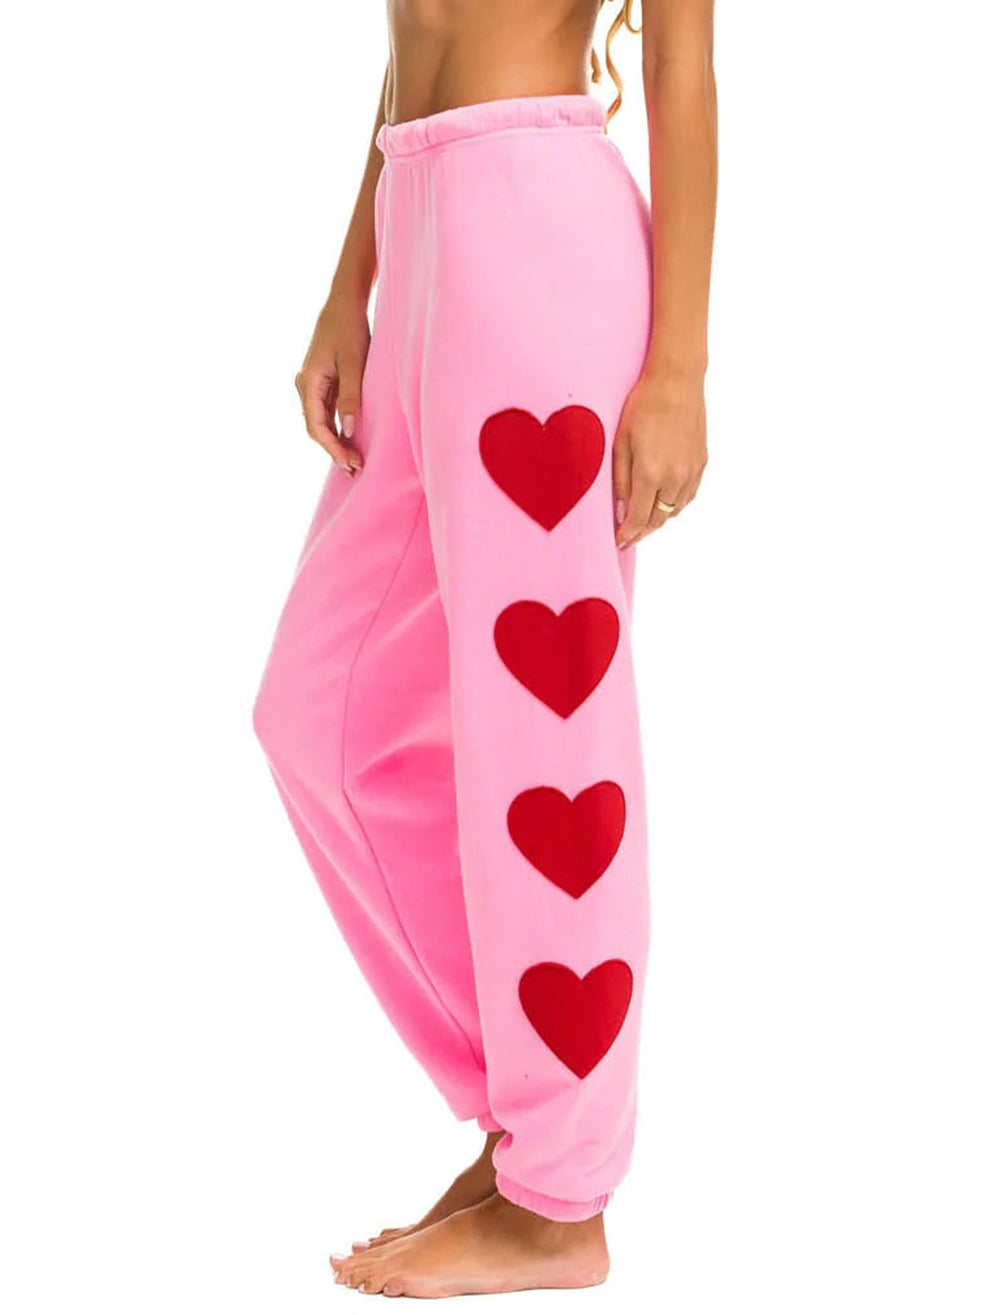 Model wearing Aviator Nation's heart stitch four sweatpants in pink.